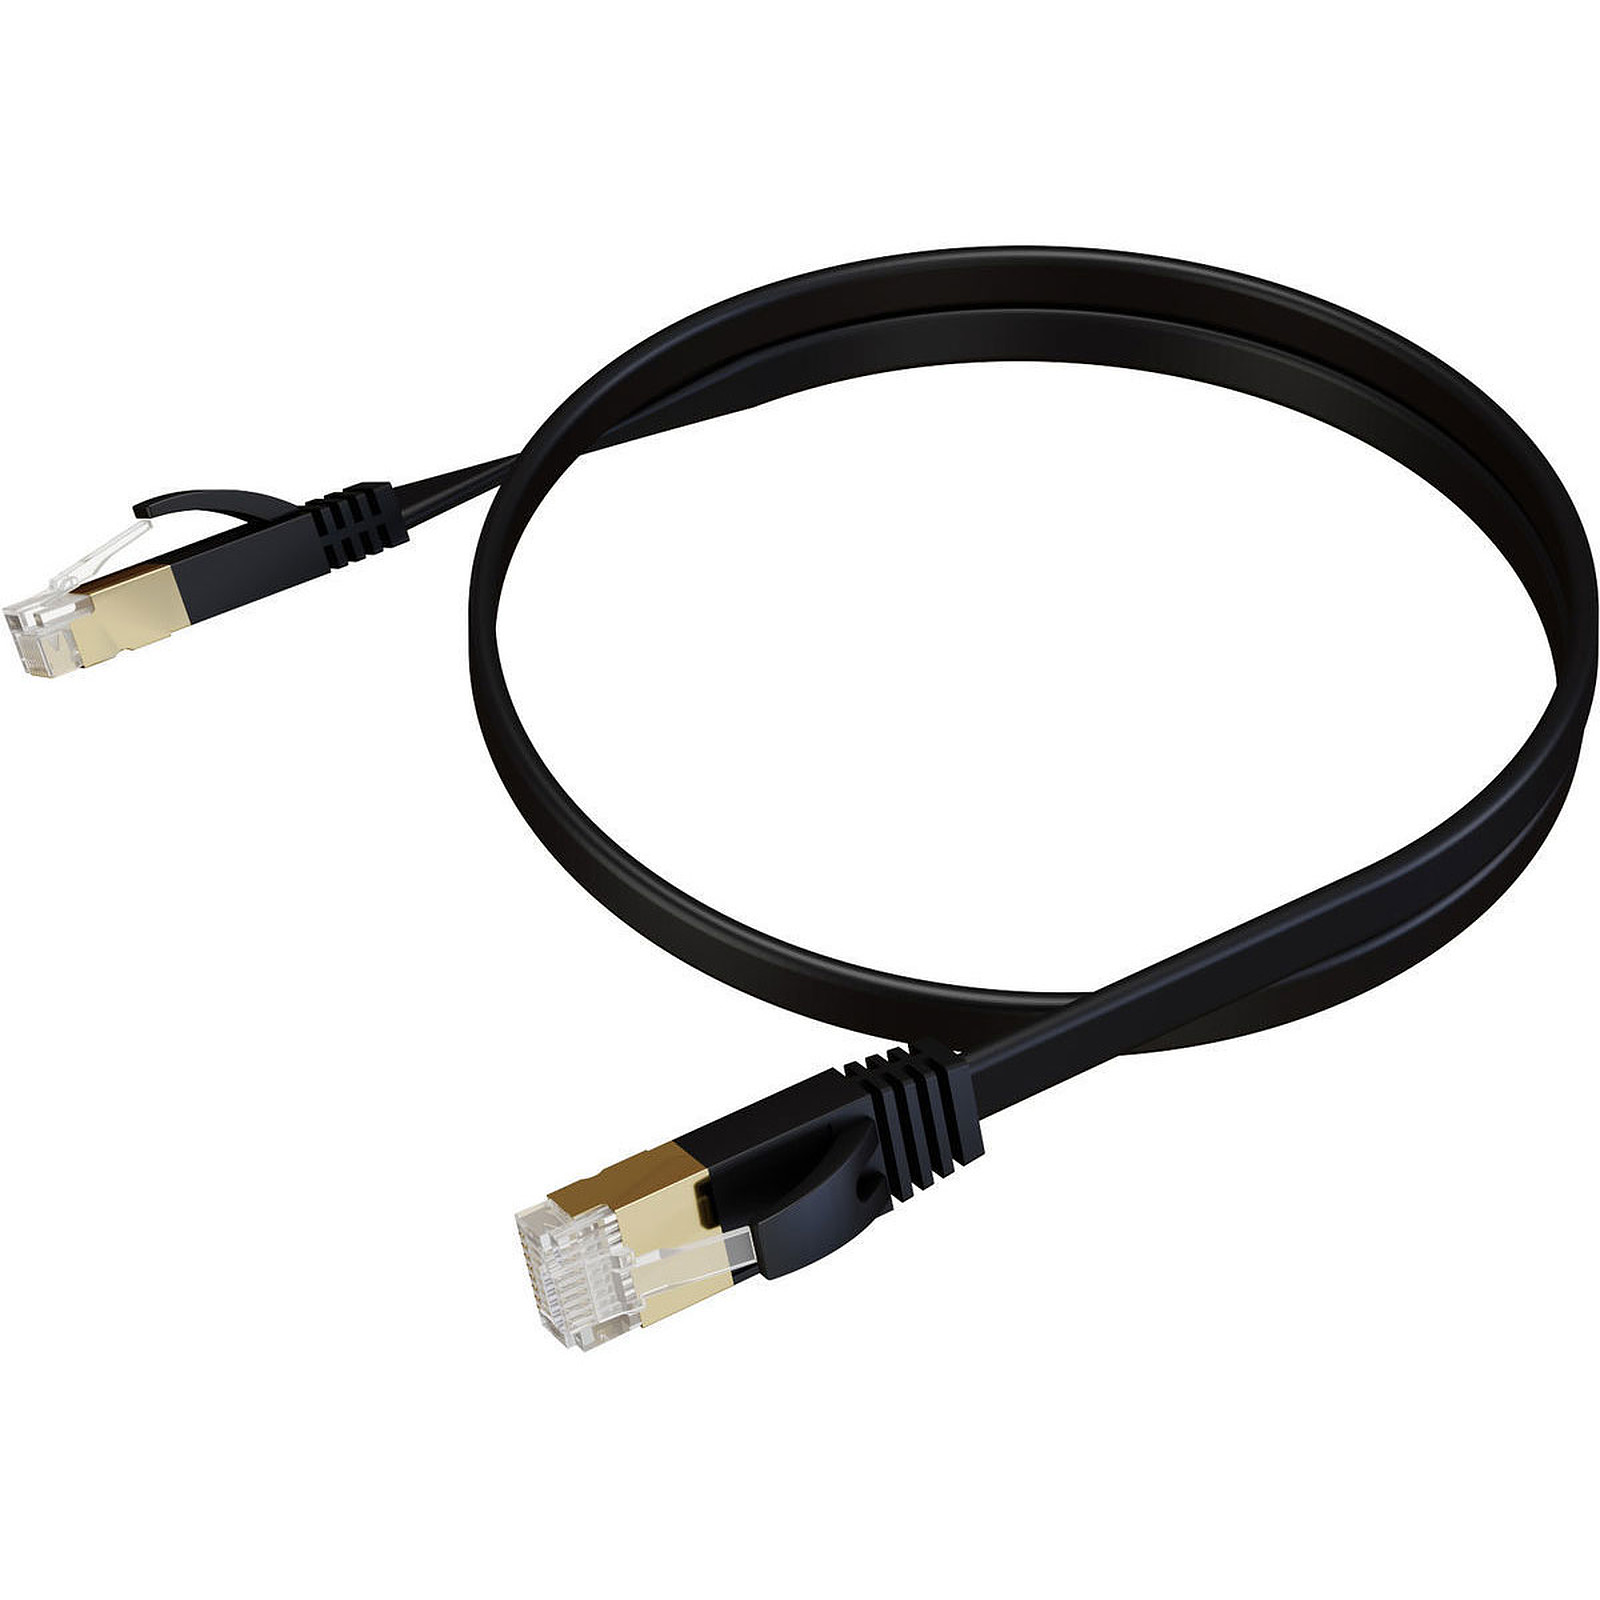 Real Cable E-NET 600-2 (1 m) - Cable RJ45 Real Cable